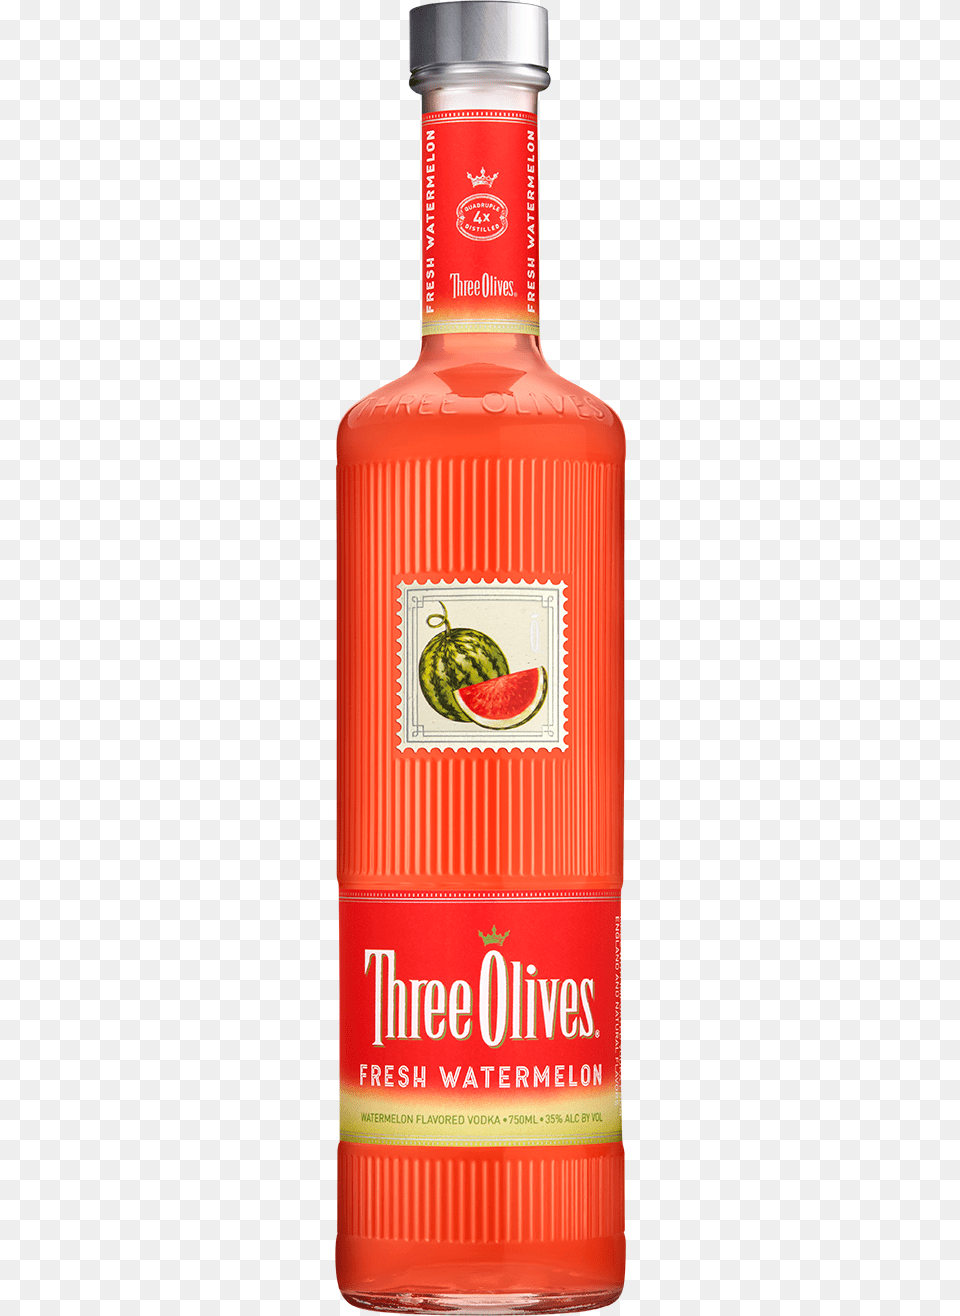 Three Olives Fresh Watermelon Vodka, Food, Ketchup, Bottle, Cosmetics Free Png Download